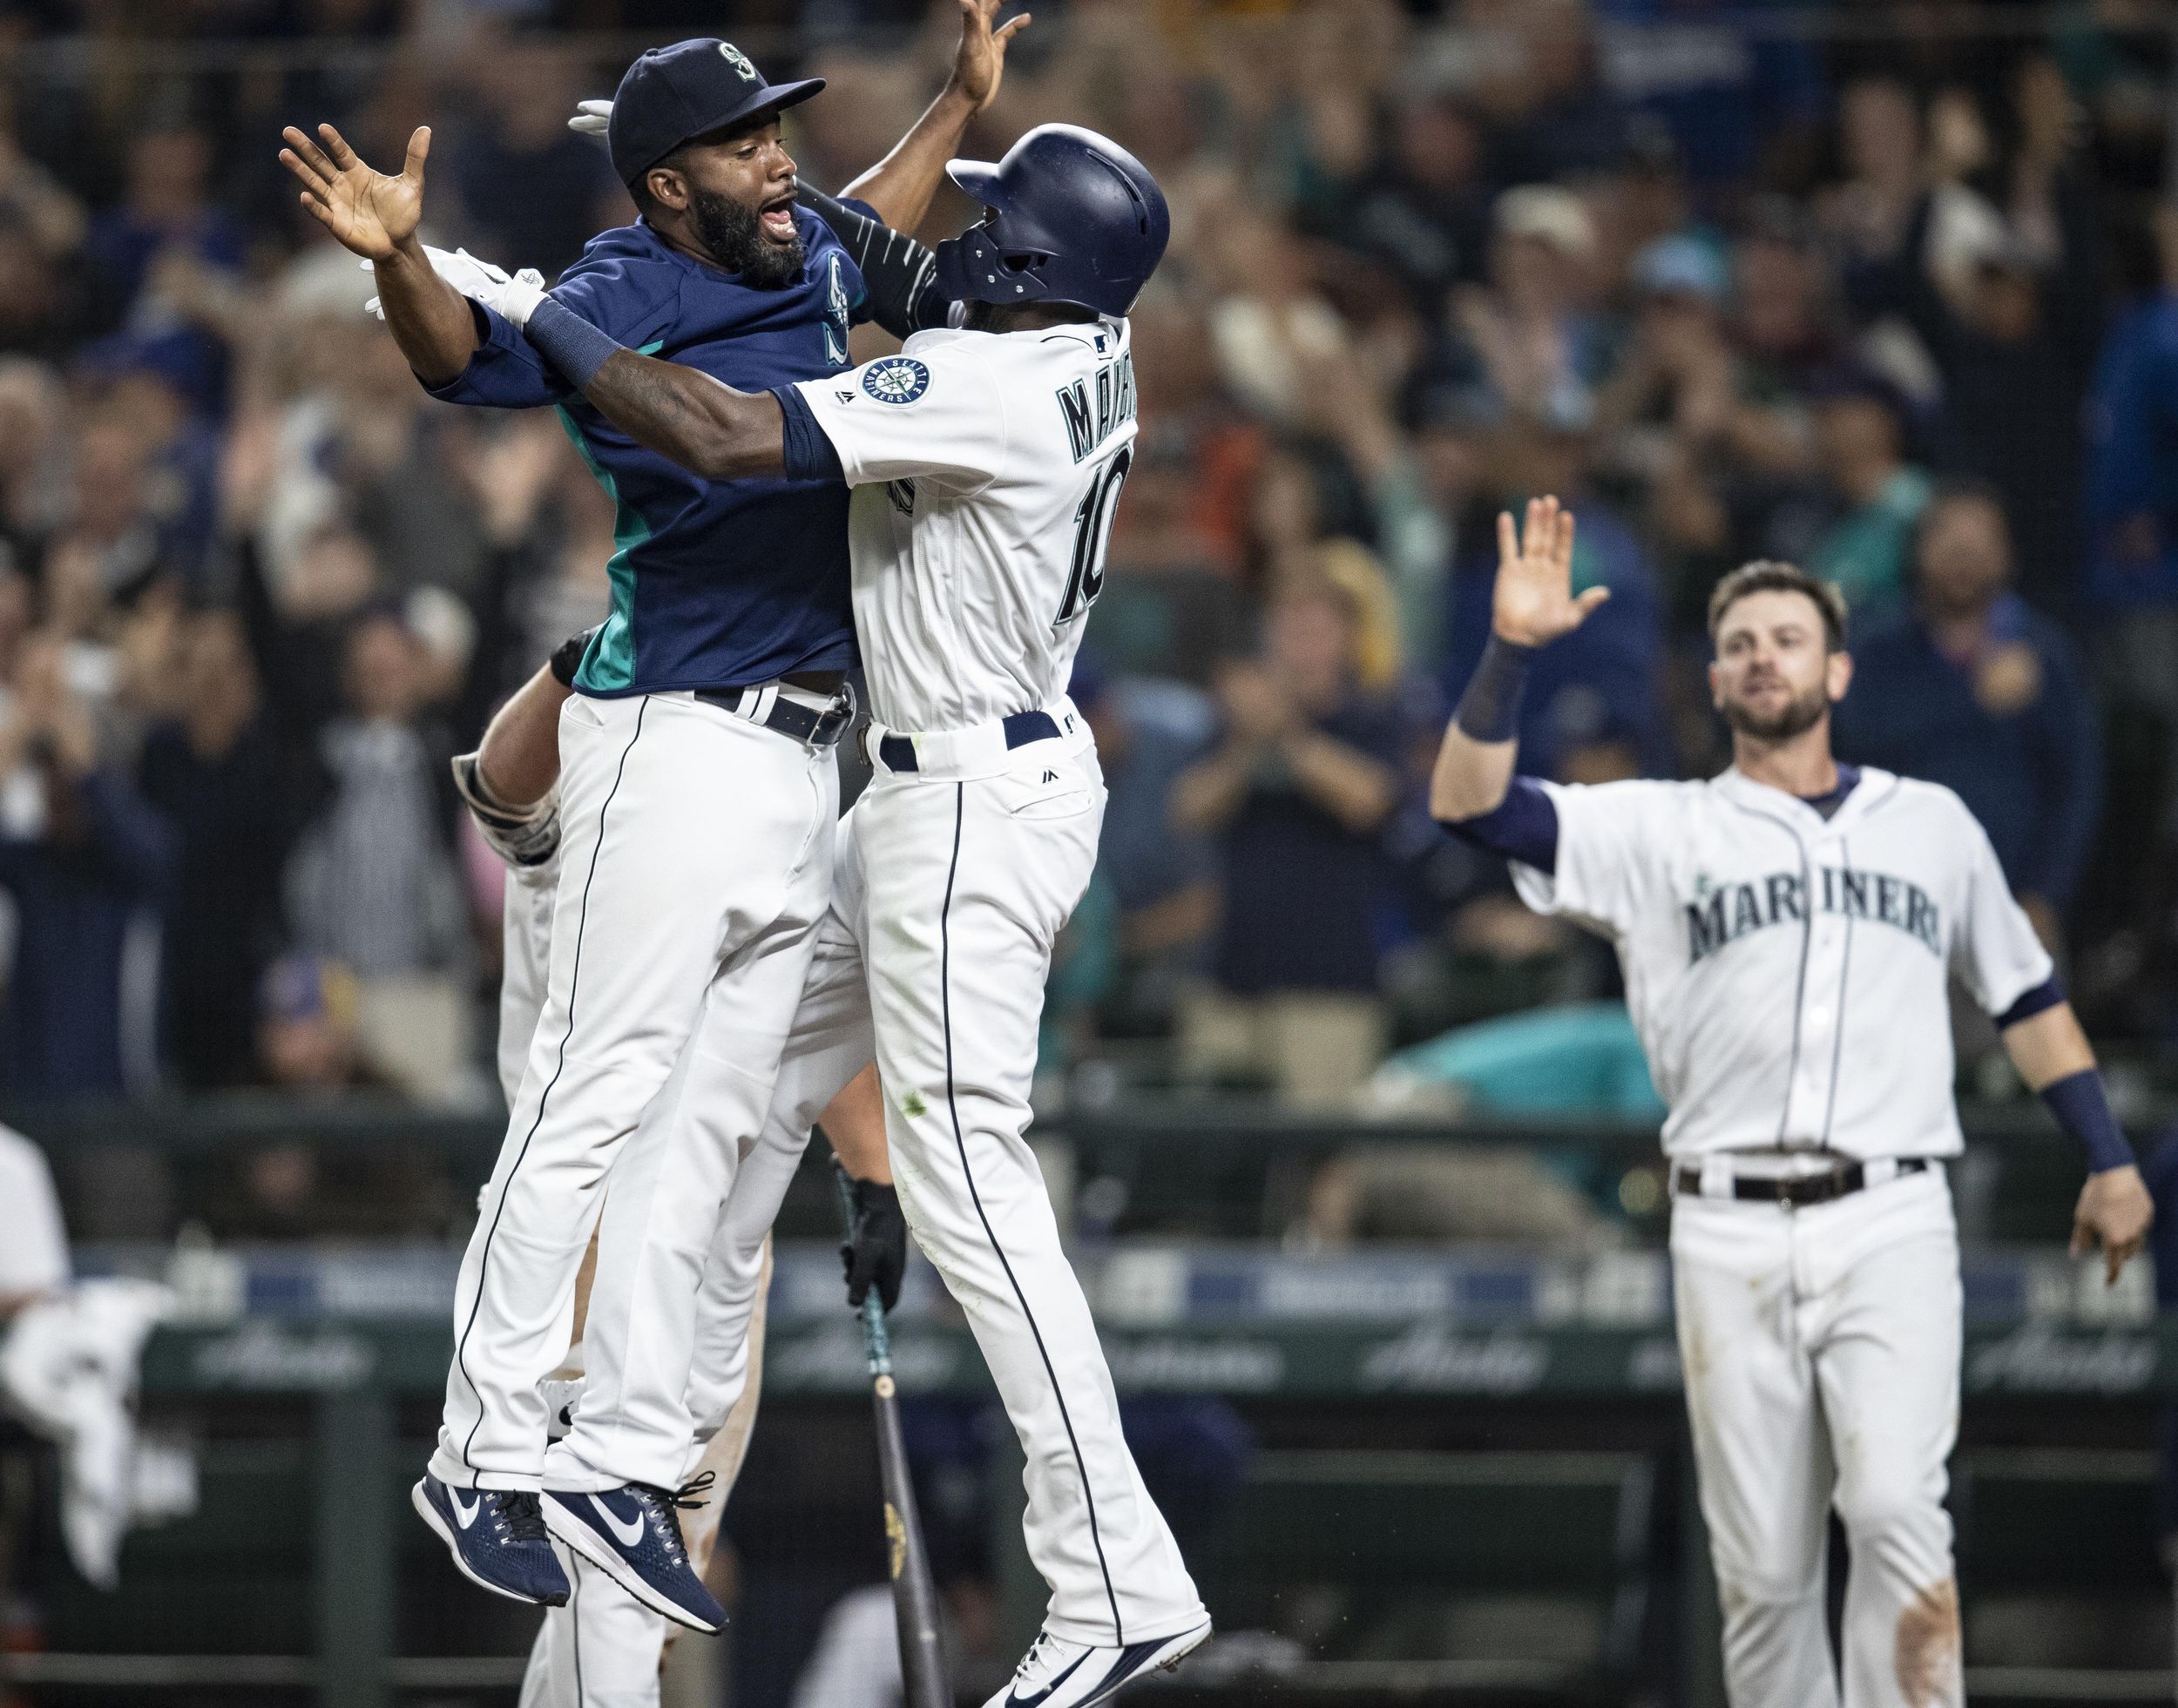 After Edwin Diaz blows save, Mariners beat Dodgers on walk-off